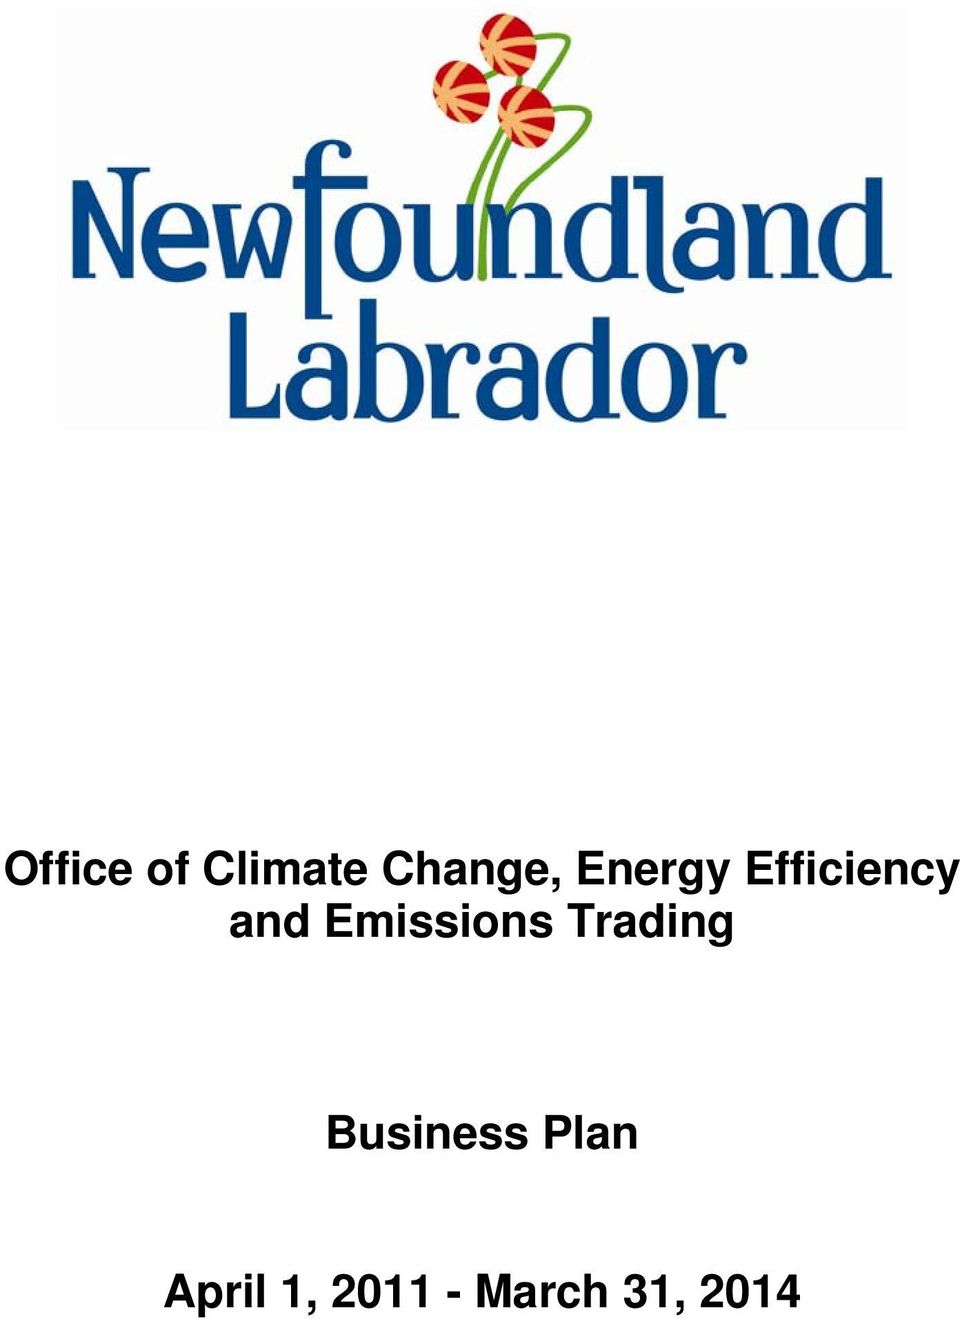 Emissions Trading Business